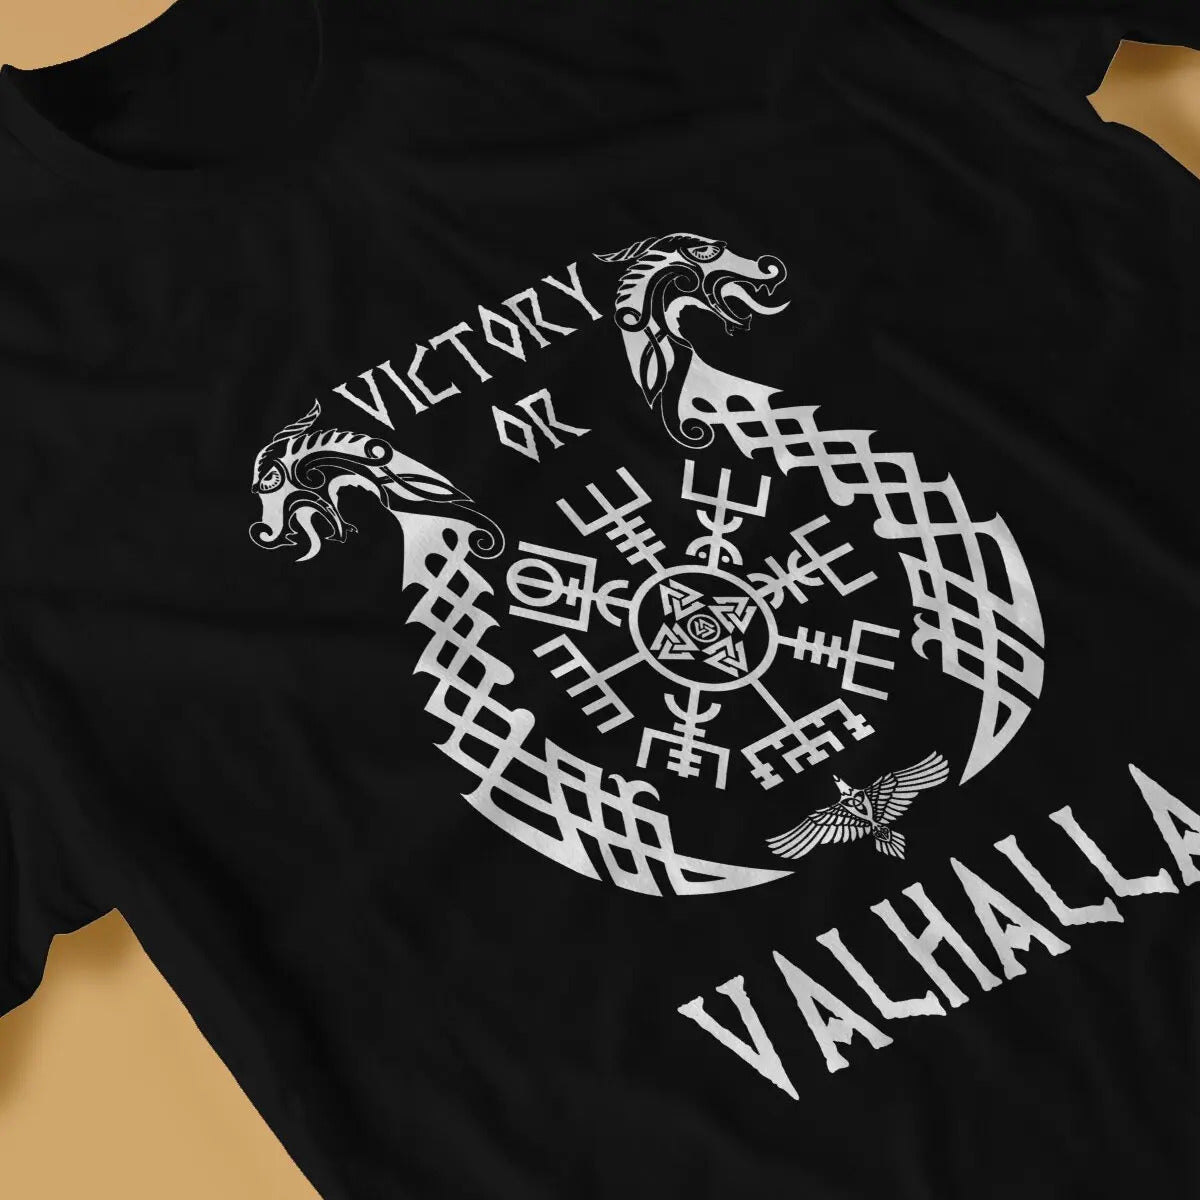 Victory or Valhalla T-shirt